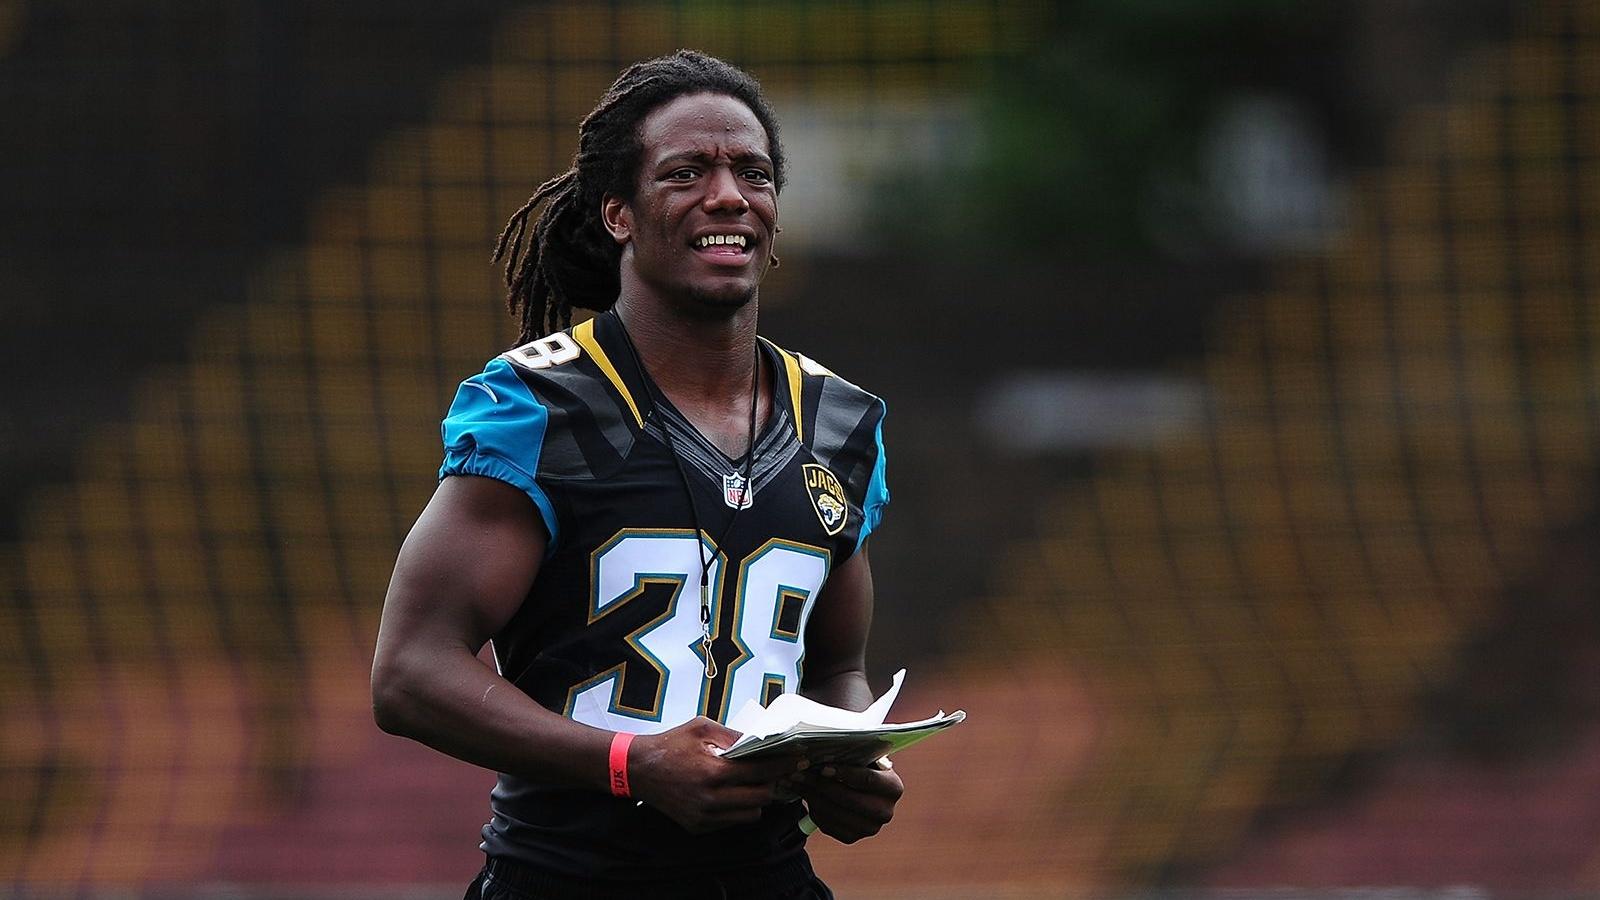 Sergio Brown is shown here helping to coach a team of local school children on July 15, 2015, in London, England. (Dan Mullan / Getty Images via CNN)